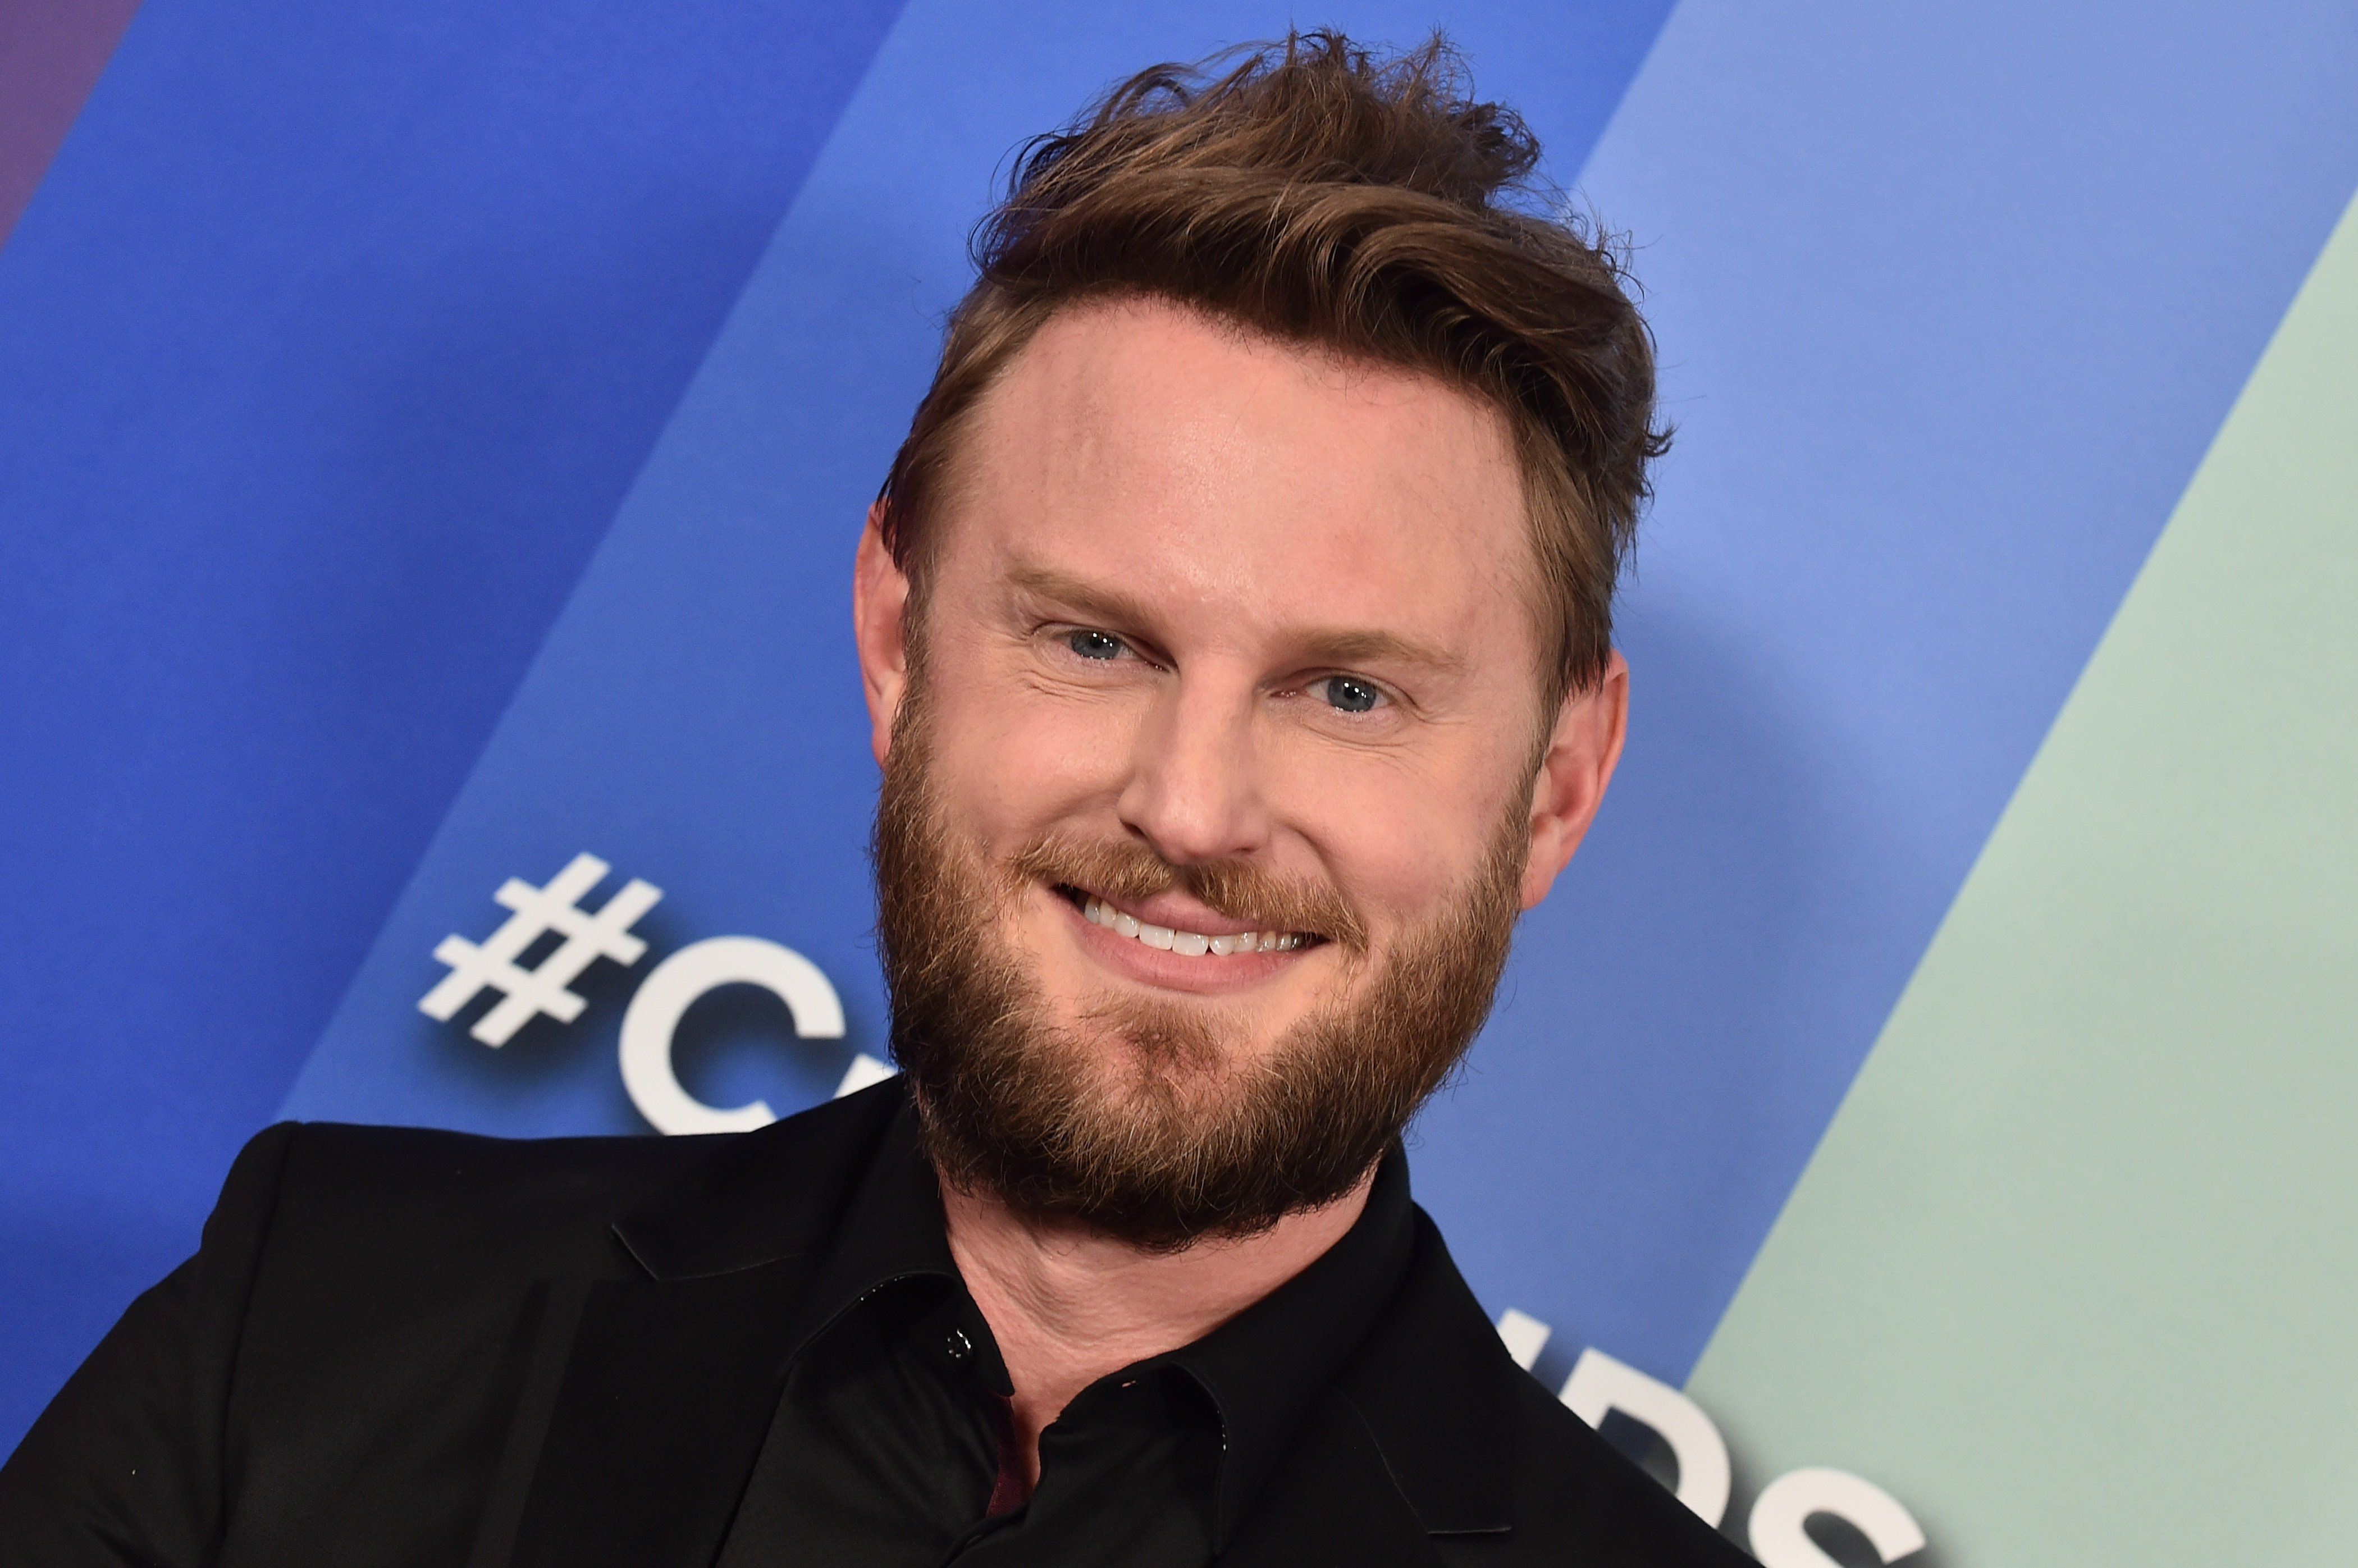 
Bobby Berk Reveals Shocking Details About His Past in New Book
